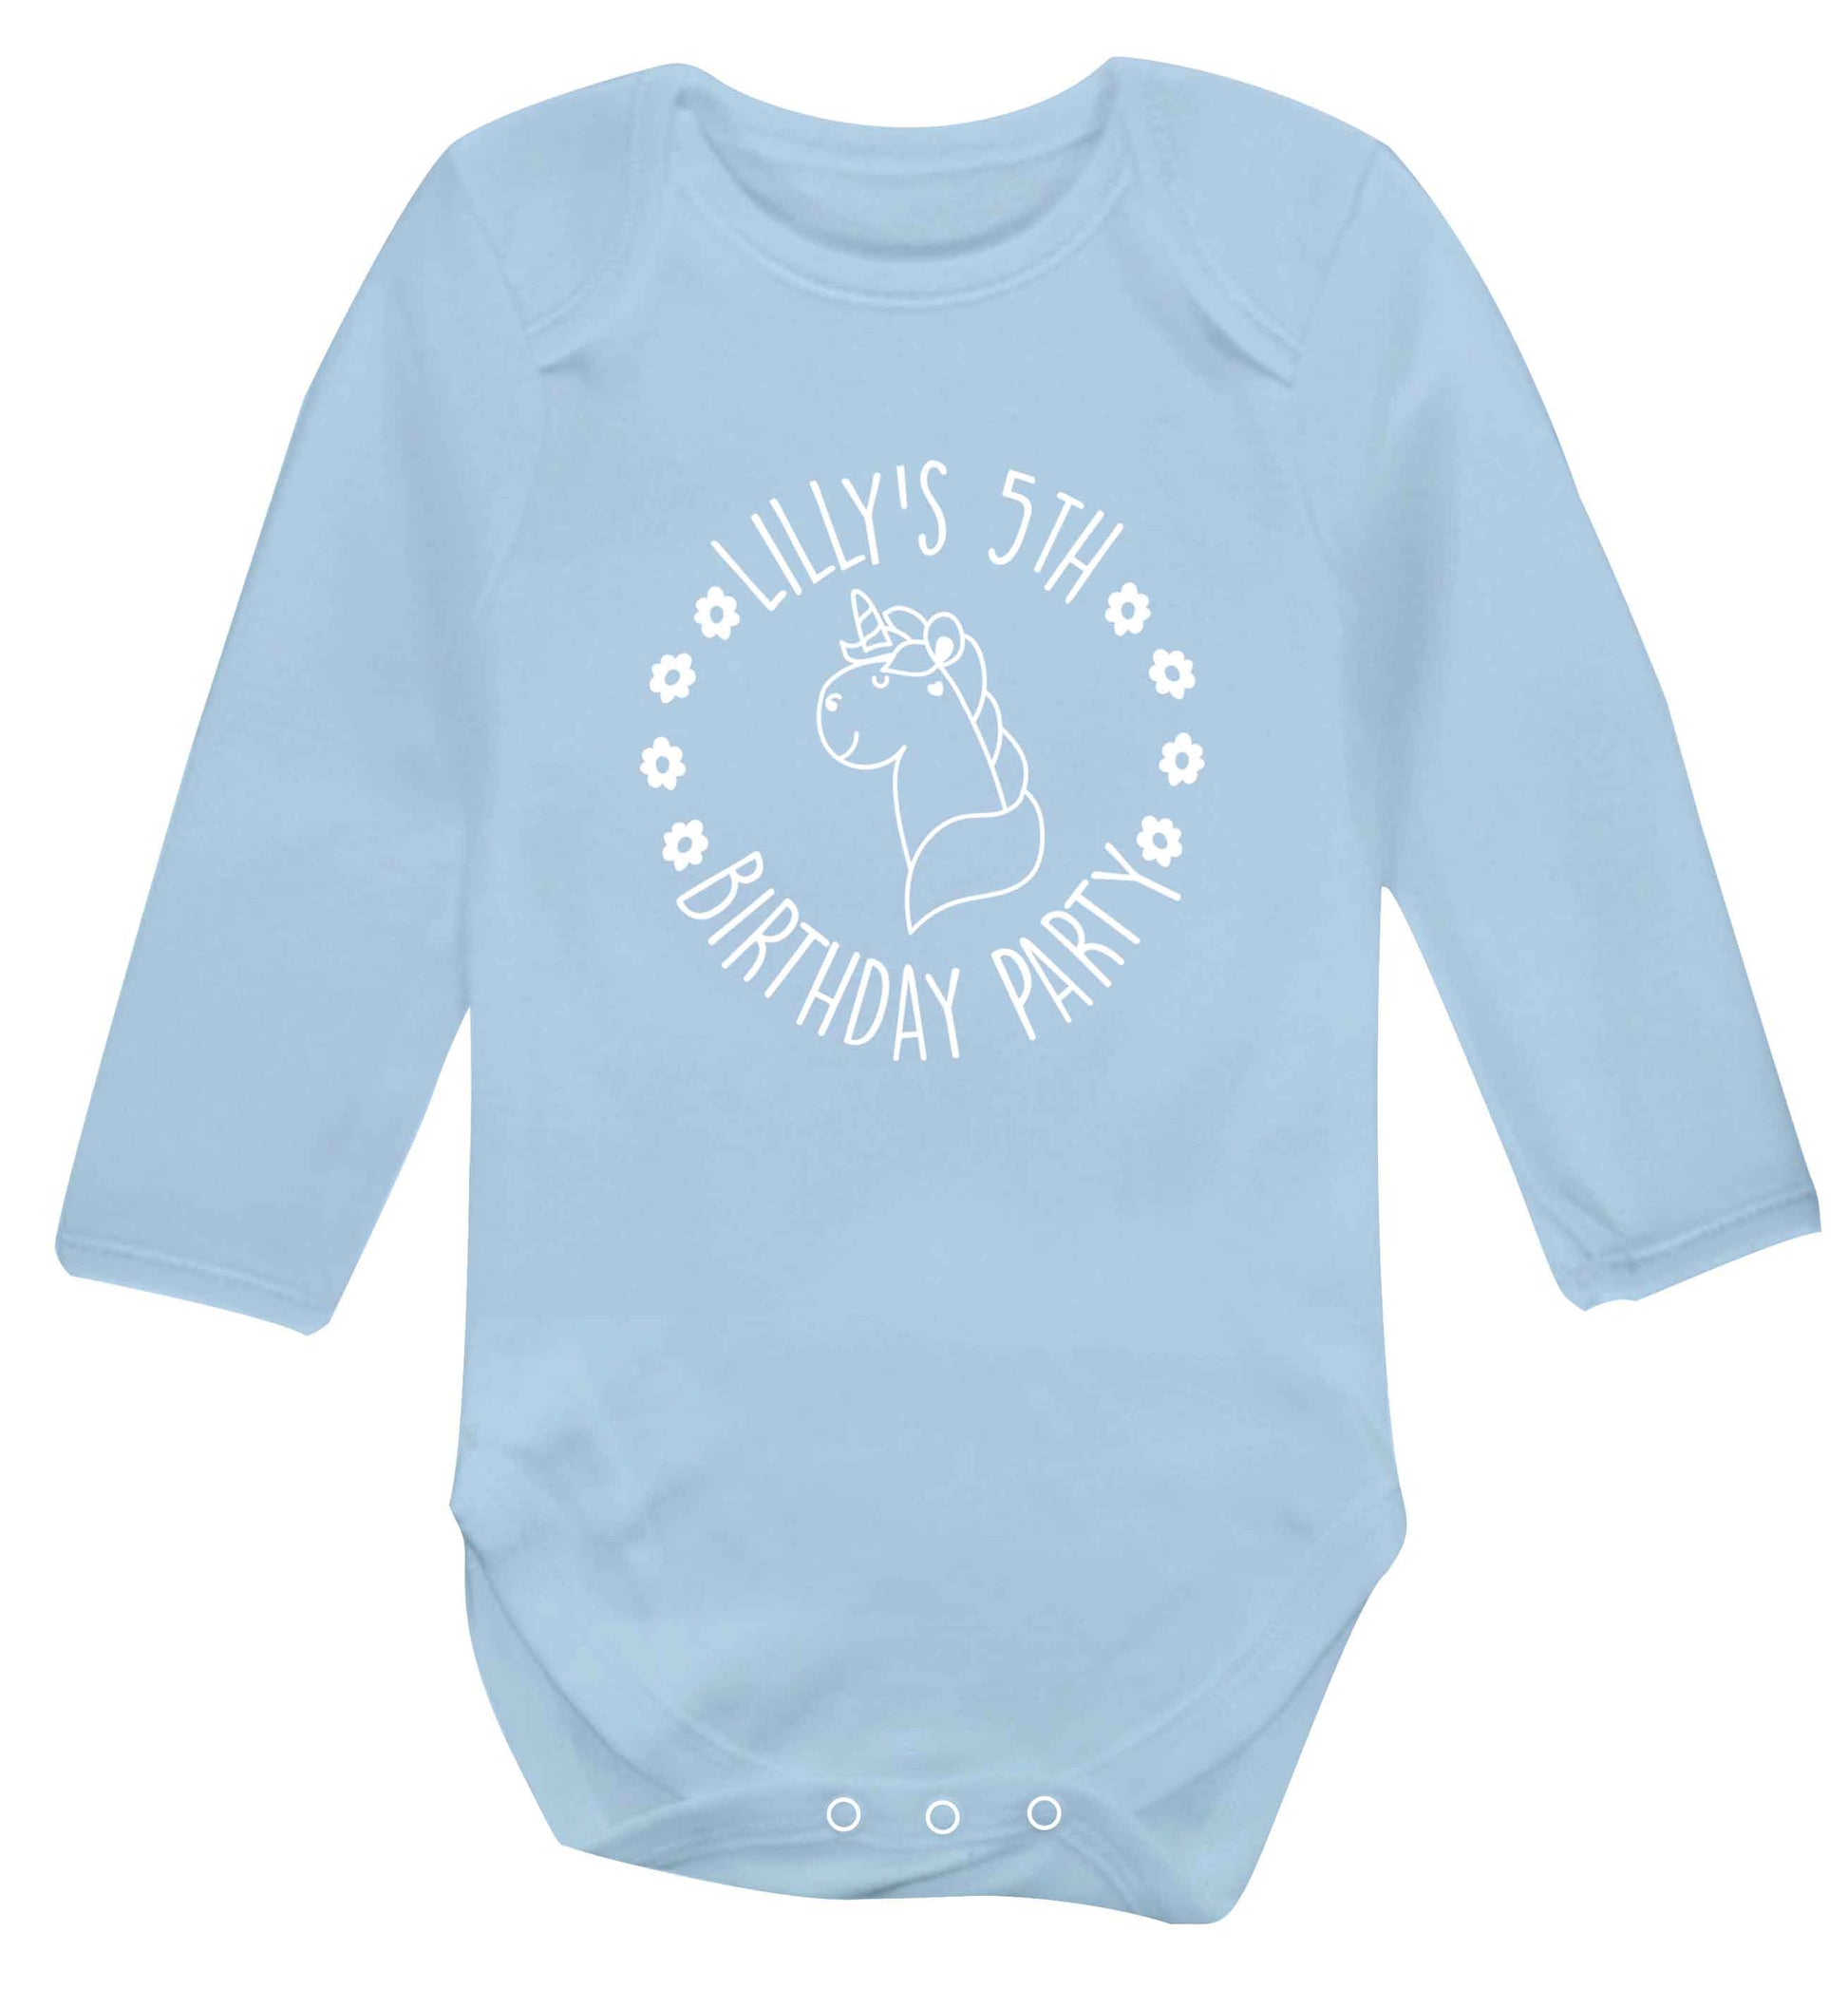 Personalised unicorn birthday party baby vest long sleeved pale blue 6-12 months